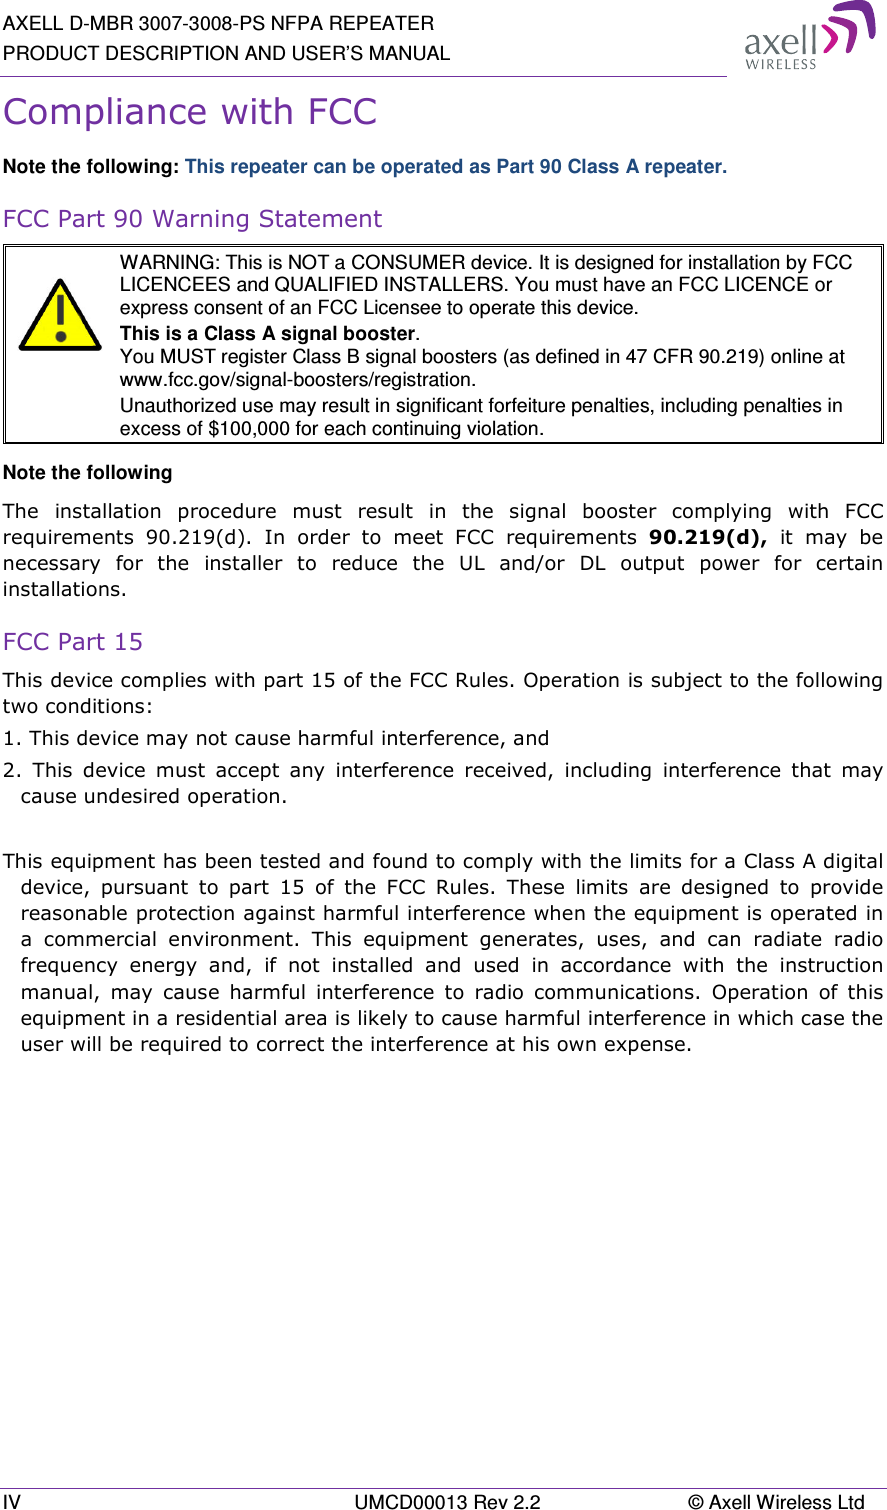 AXELL D-MBR 3007-3008-PS NFPA REPEATER PRODUCT DESCRIPTION AND USER’S MANUAL IV  UMCD00013 Rev 2.2  © Axell Wireless Ltd Compliance with FCC Note the following: This repeater can be operated as Part 90 Class A repeater. FCC Part 90 Warning Statement   WARNING: This is NOT a CONSUMER device. It is designed for installation by FCC LICENCEES and QUALIFIED INSTALLERS. You must have an FCC LICENCE or express consent of an FCC Licensee to operate this device. This is a Class A signal booster. You MUST register Class B signal boosters (as defined in 47 CFR 90.219) online at www.fcc.gov/signal-boosters/registration.  Unauthorized use may result in significant forfeiture penalties, including penalties in excess of $100,000 for each continuing violation. Note the following The  installation  procedure  must  result  in  the  signal  booster  complying  with  FCC requirements  90.219(d).  In  order  to  meet  FCC  requirements  90.219(d),  it  may  be necessary  for  the  installer  to  reduce  the  UL  and/or  DL  output  power  for  certain installations. FCC Part 15 This device complies with part 15 of the FCC Rules. Operation is subject to the following two conditions:  1. This device may not cause harmful interference, and   2.  This  device  must  accept  any  interference  received,  including  interference  that  may cause undesired operation.   This equipment has been tested and found to comply with the limits for a Class A digital device,  pursuant  to  part  15  of  the  FCC  Rules.  These  limits  are  designed  to  provide reasonable protection against harmful interference when the equipment is operated in a  commercial  environment.  This  equipment  generates,  uses,  and  can  radiate  radio frequency  energy  and,  if  not  installed  and  used  in  accordance  with  the  instruction manual,  may  cause  harmful  interference  to  radio  communications.  Operation  of  this equipment in a residential area is likely to cause harmful interference in which case the user will be required to correct the interference at his own expense.    